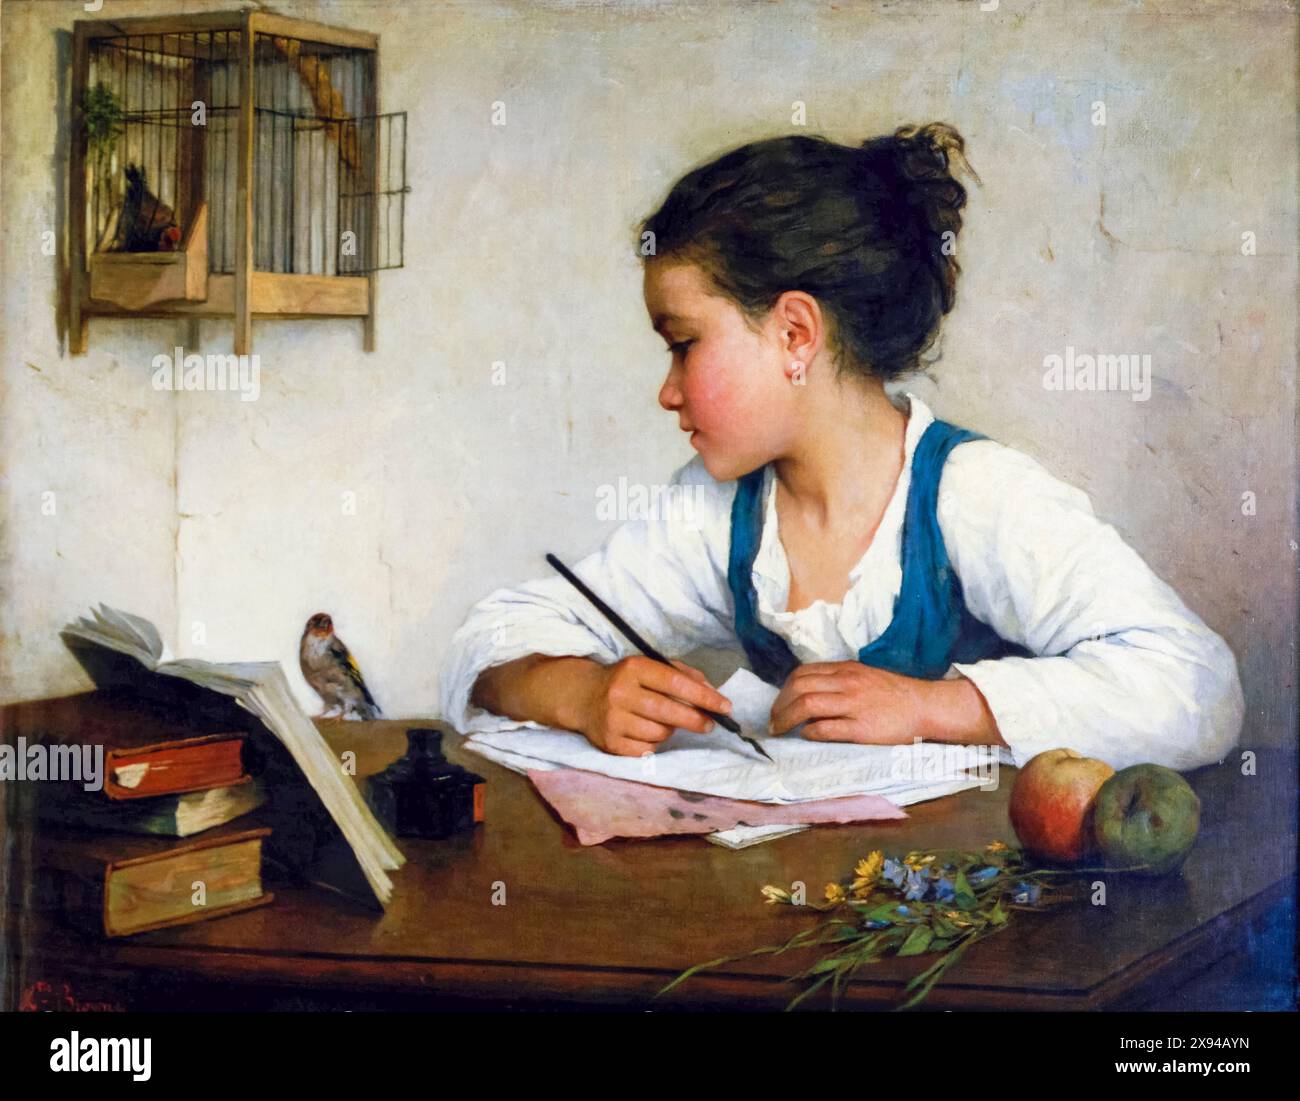 Sophie de Bouteiller known as Henriette Browne, A Girl Writing: The Pet Goldfinch, painting in oil on canvas, circa 1870 Stock Photo